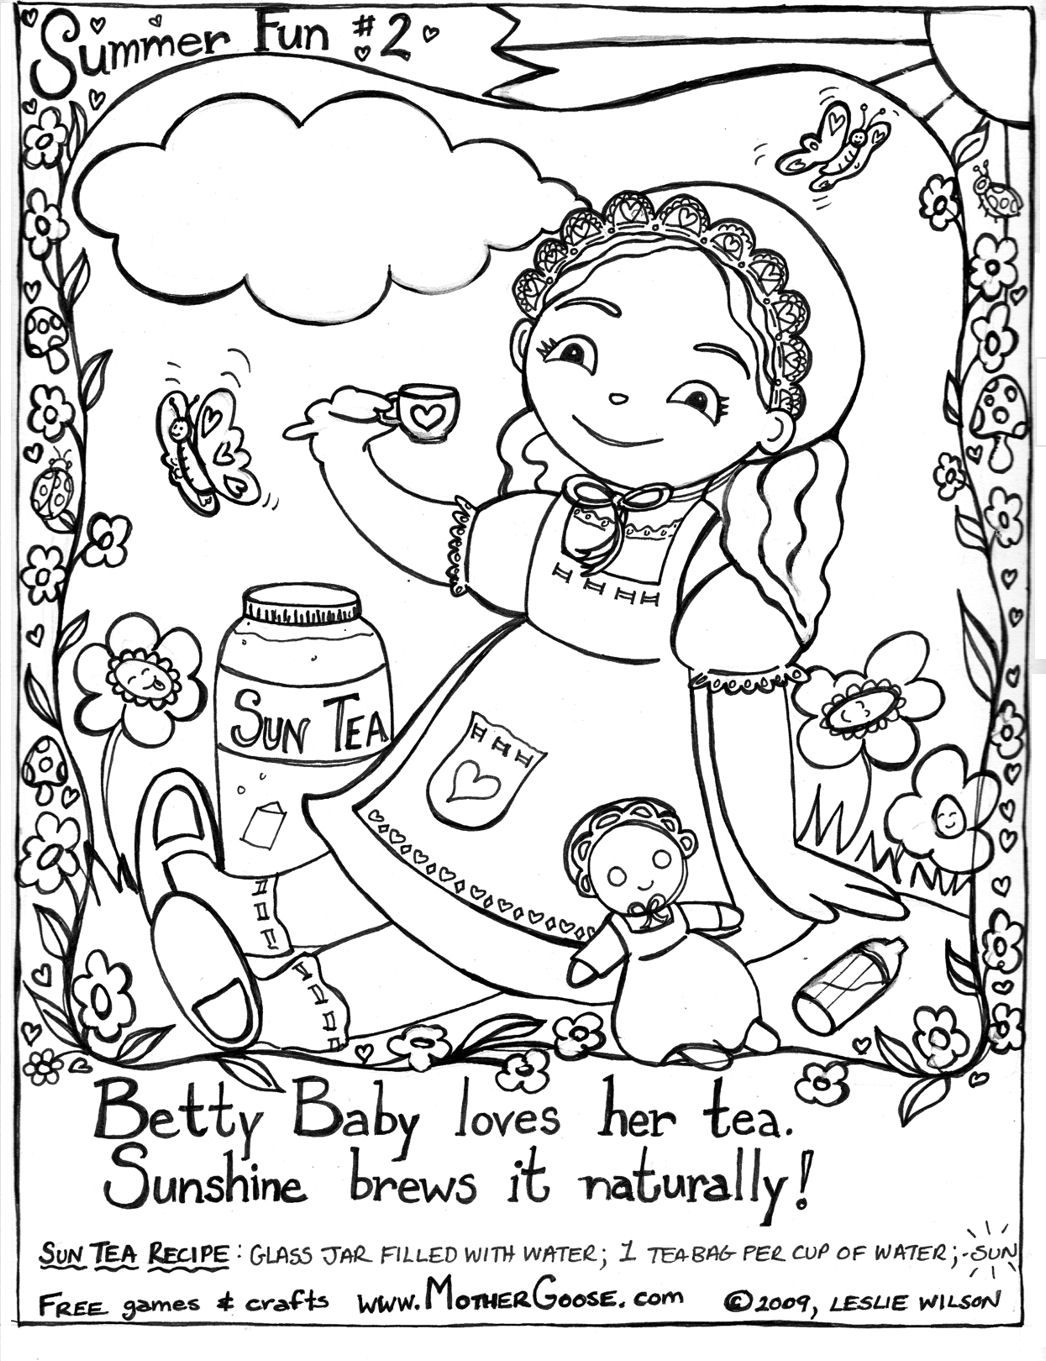 Three Summer Fun Printable Coloring Pages, a free Mother Goose ...